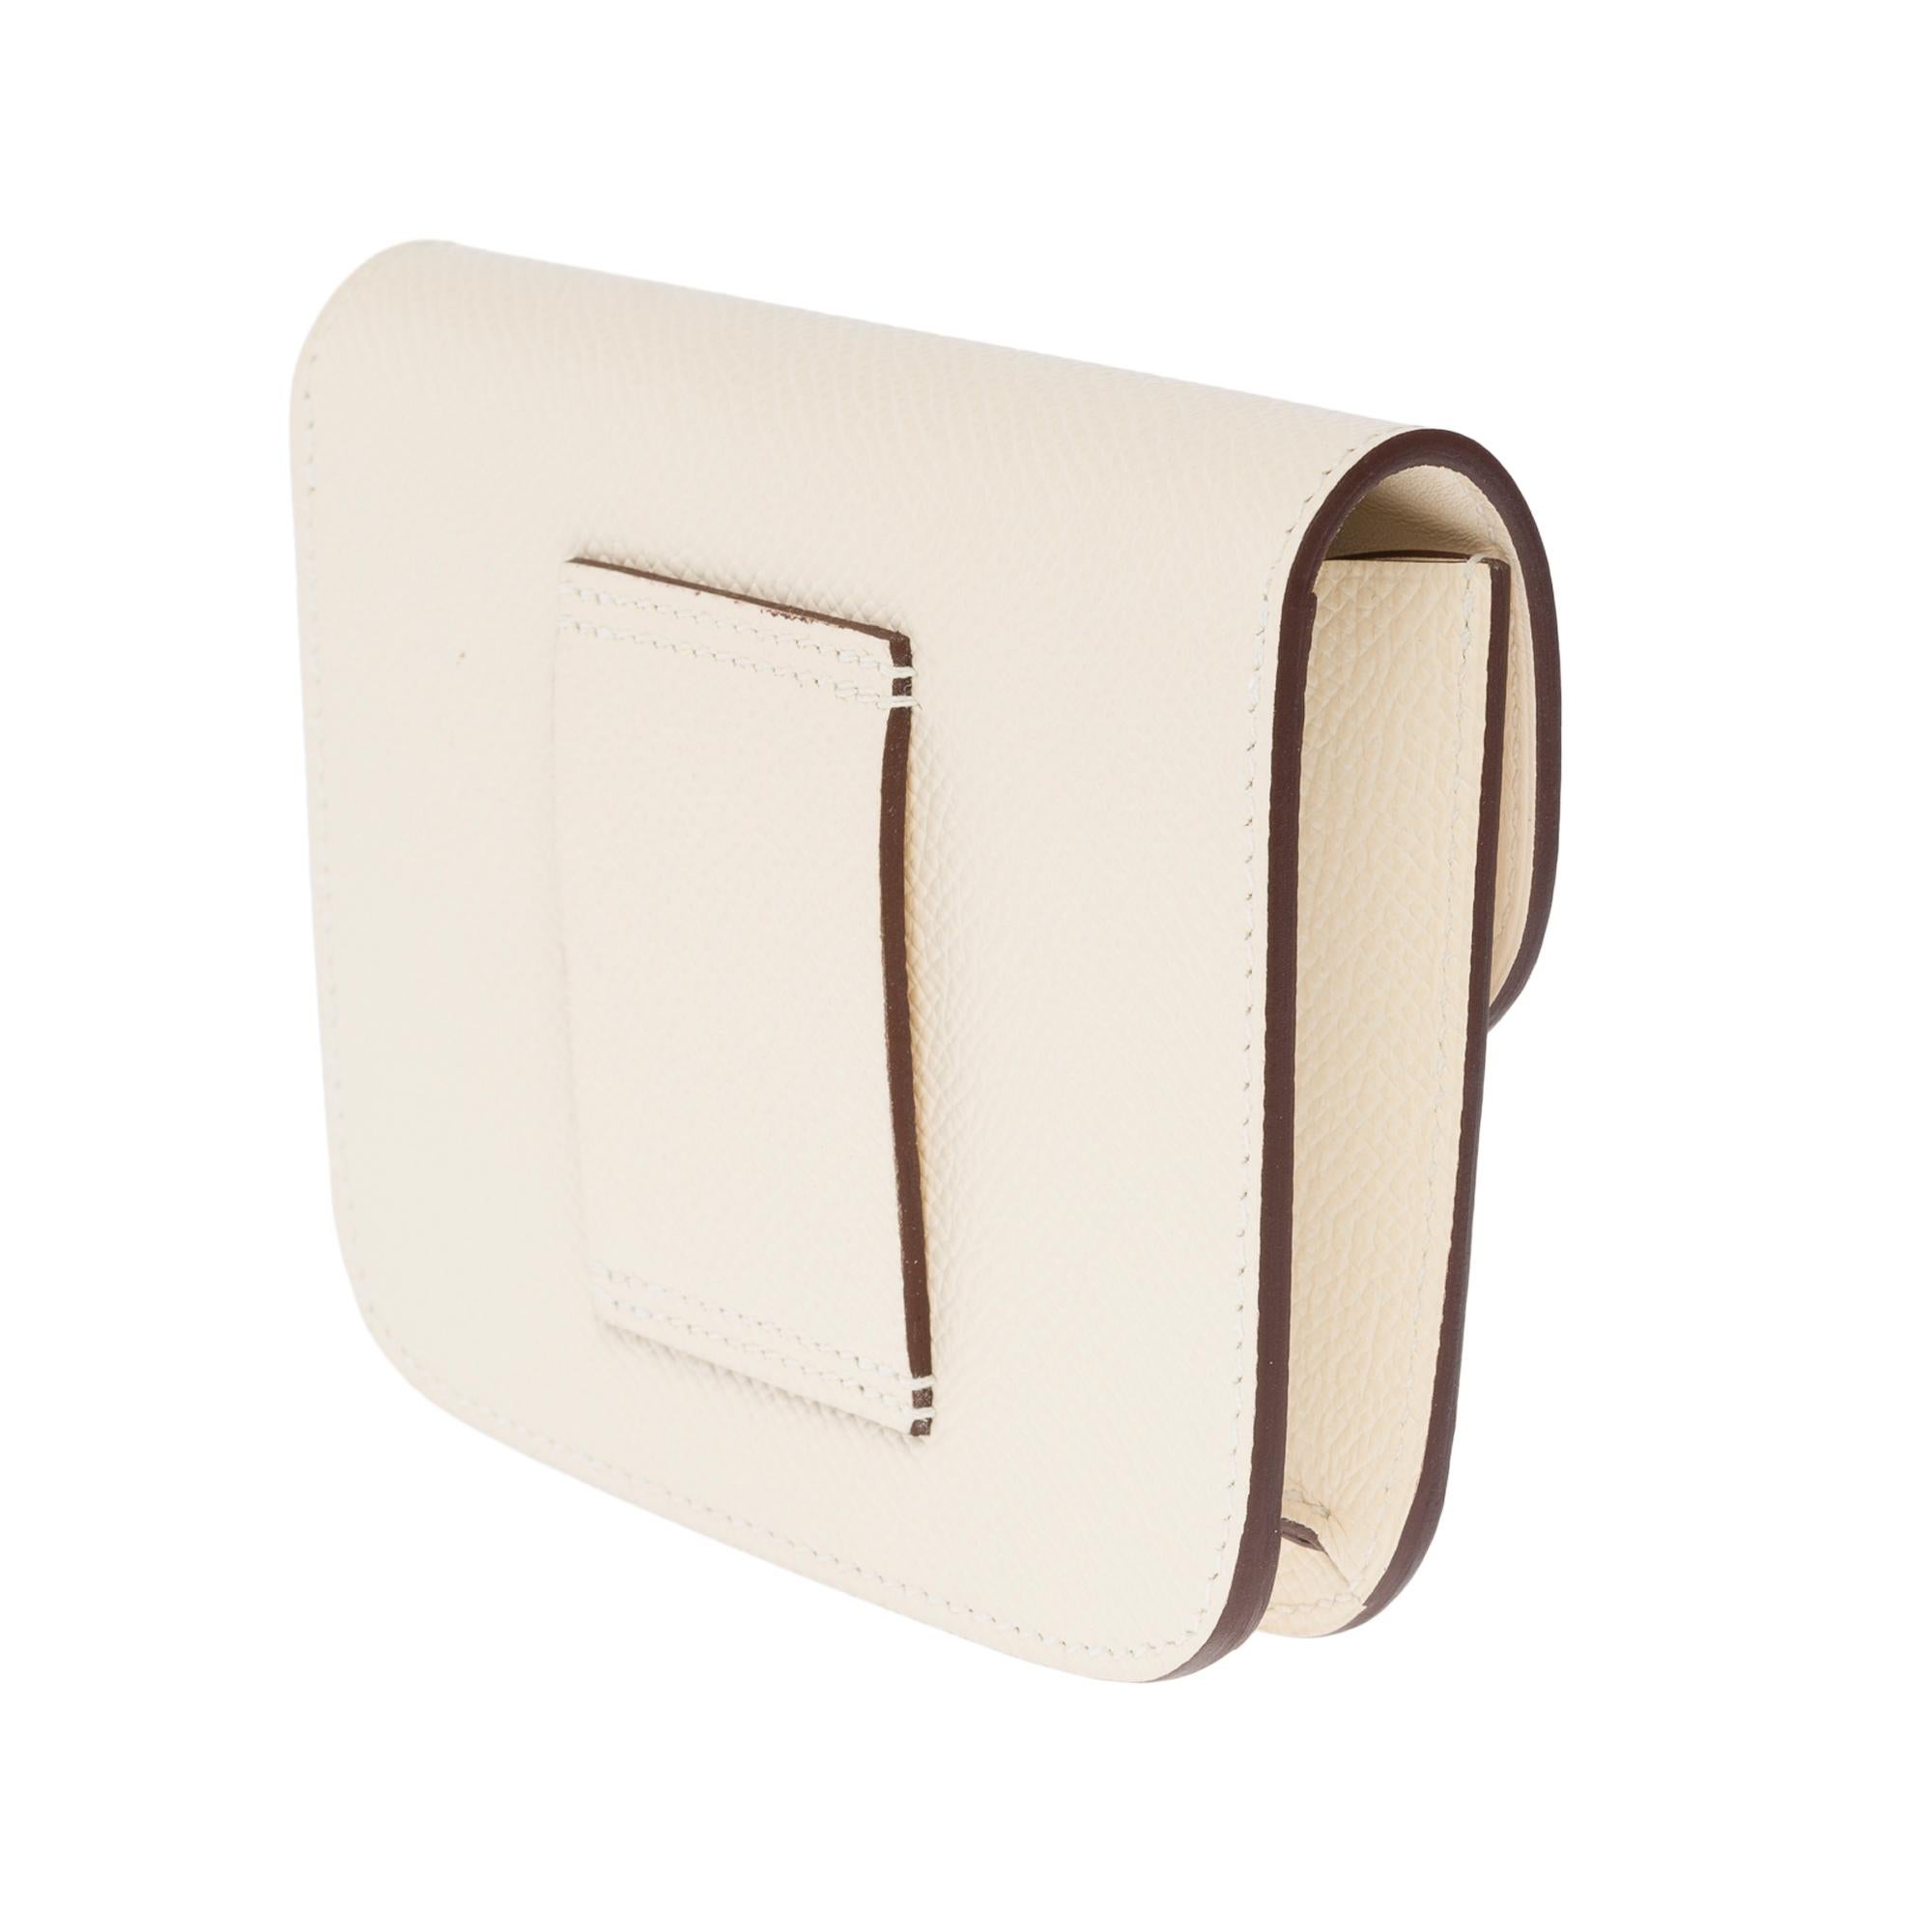 New Constance slim compact wallet in Nata Epsom calf , GHW 1